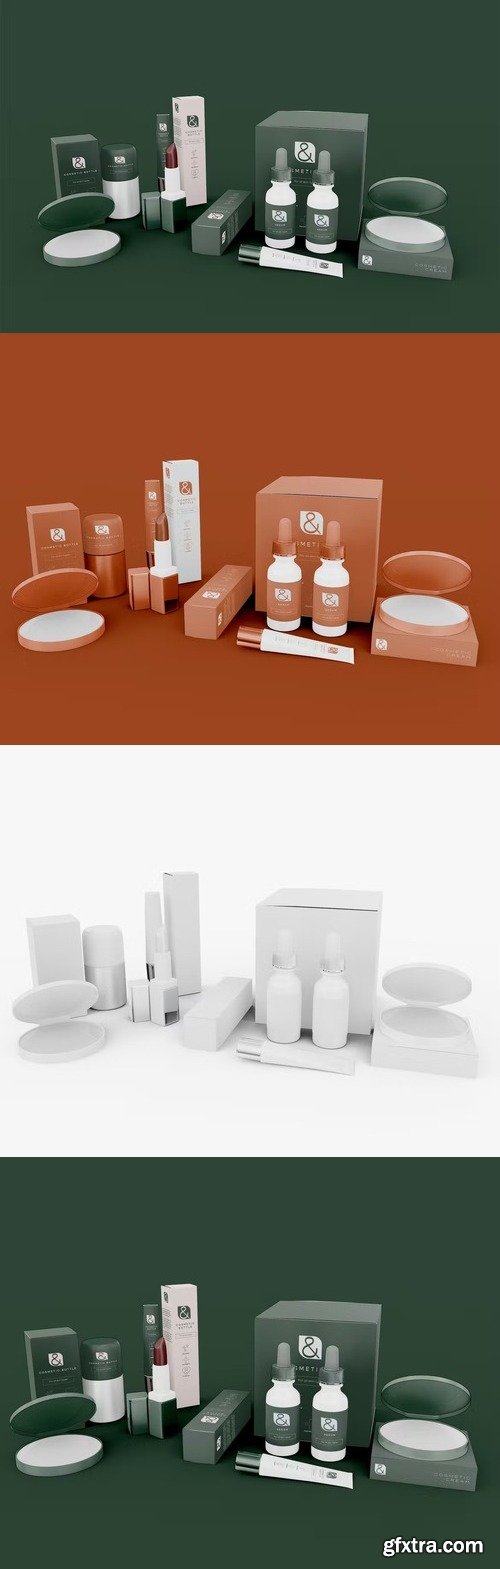 Toiletry Products Mockup